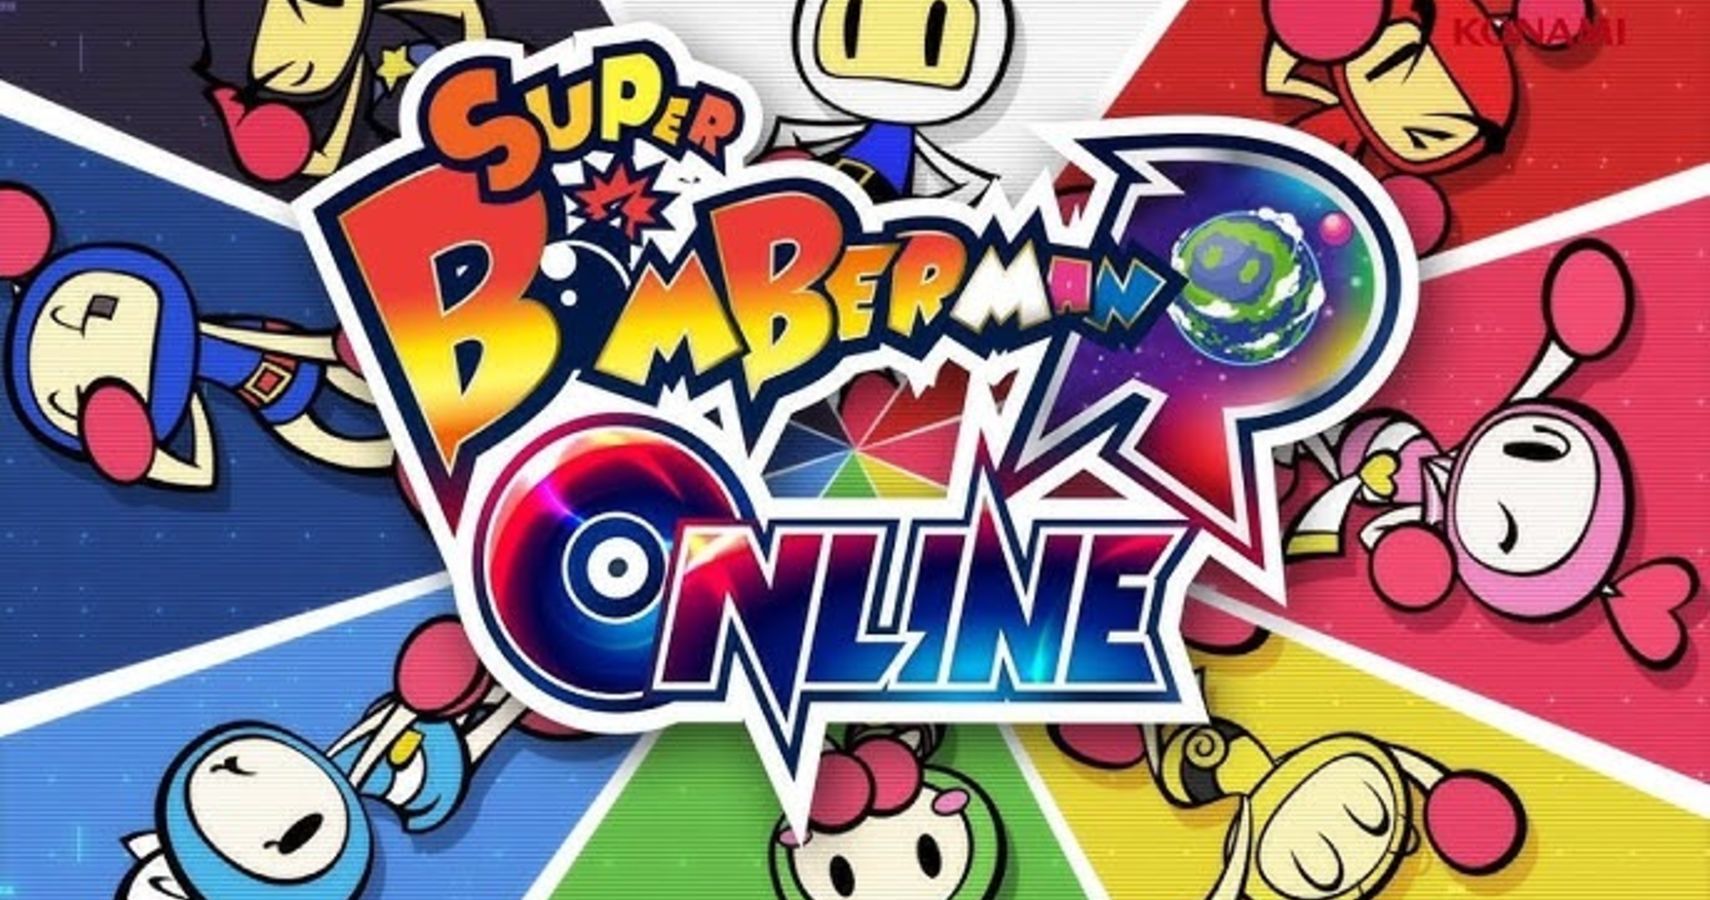 Super Bomberman R Online is now free-to-play on Stadia - 9to5Google